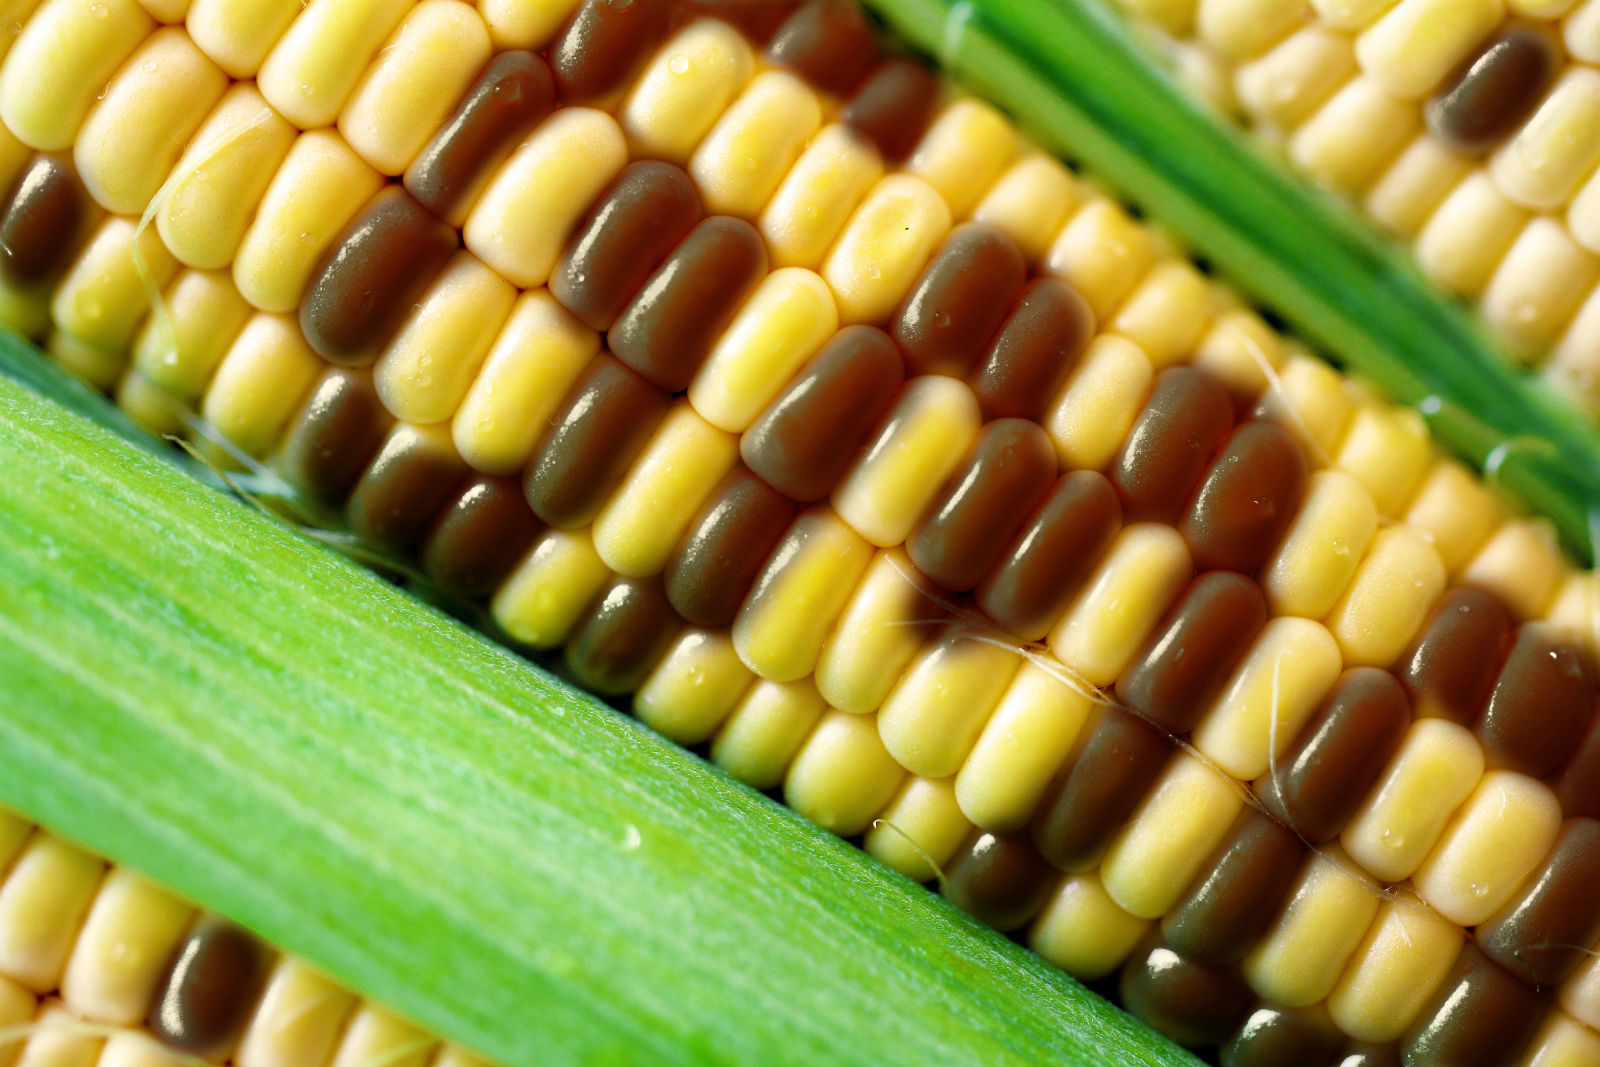 Giz Explains: What Are GMO Foods, And Are They OK To Eat?